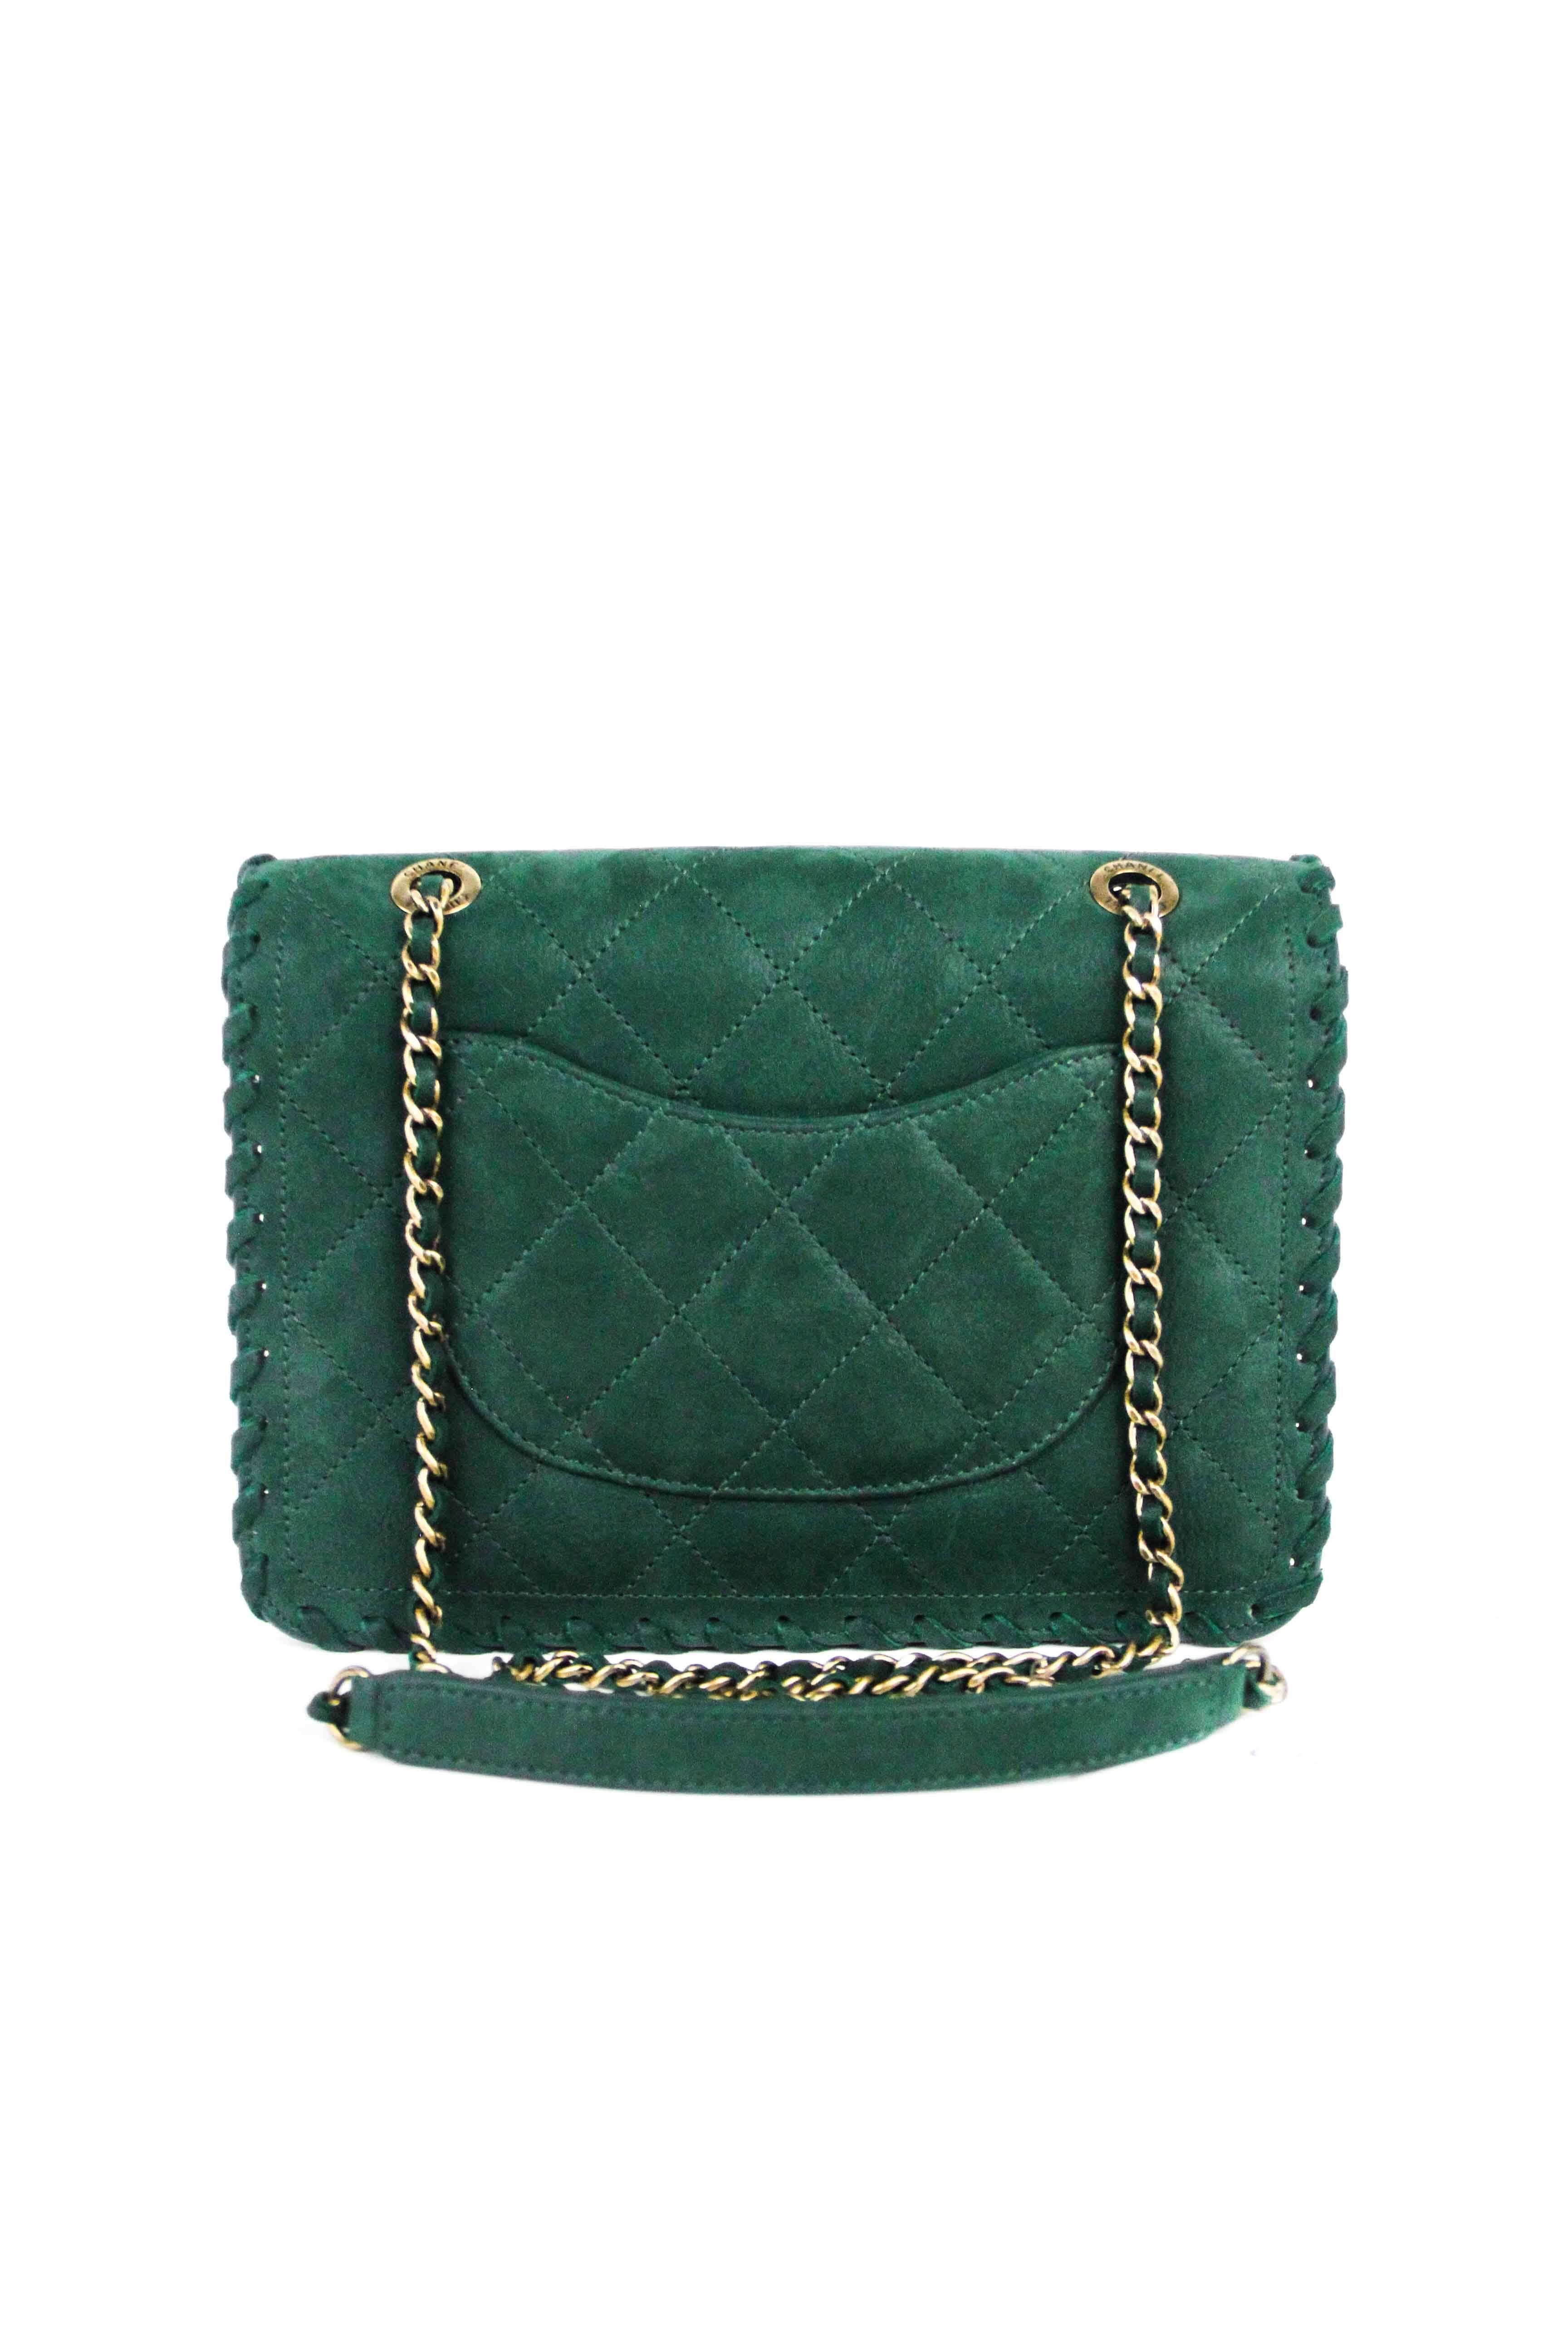 Chanel Quilted Suede Classic 2.55 Flap  1